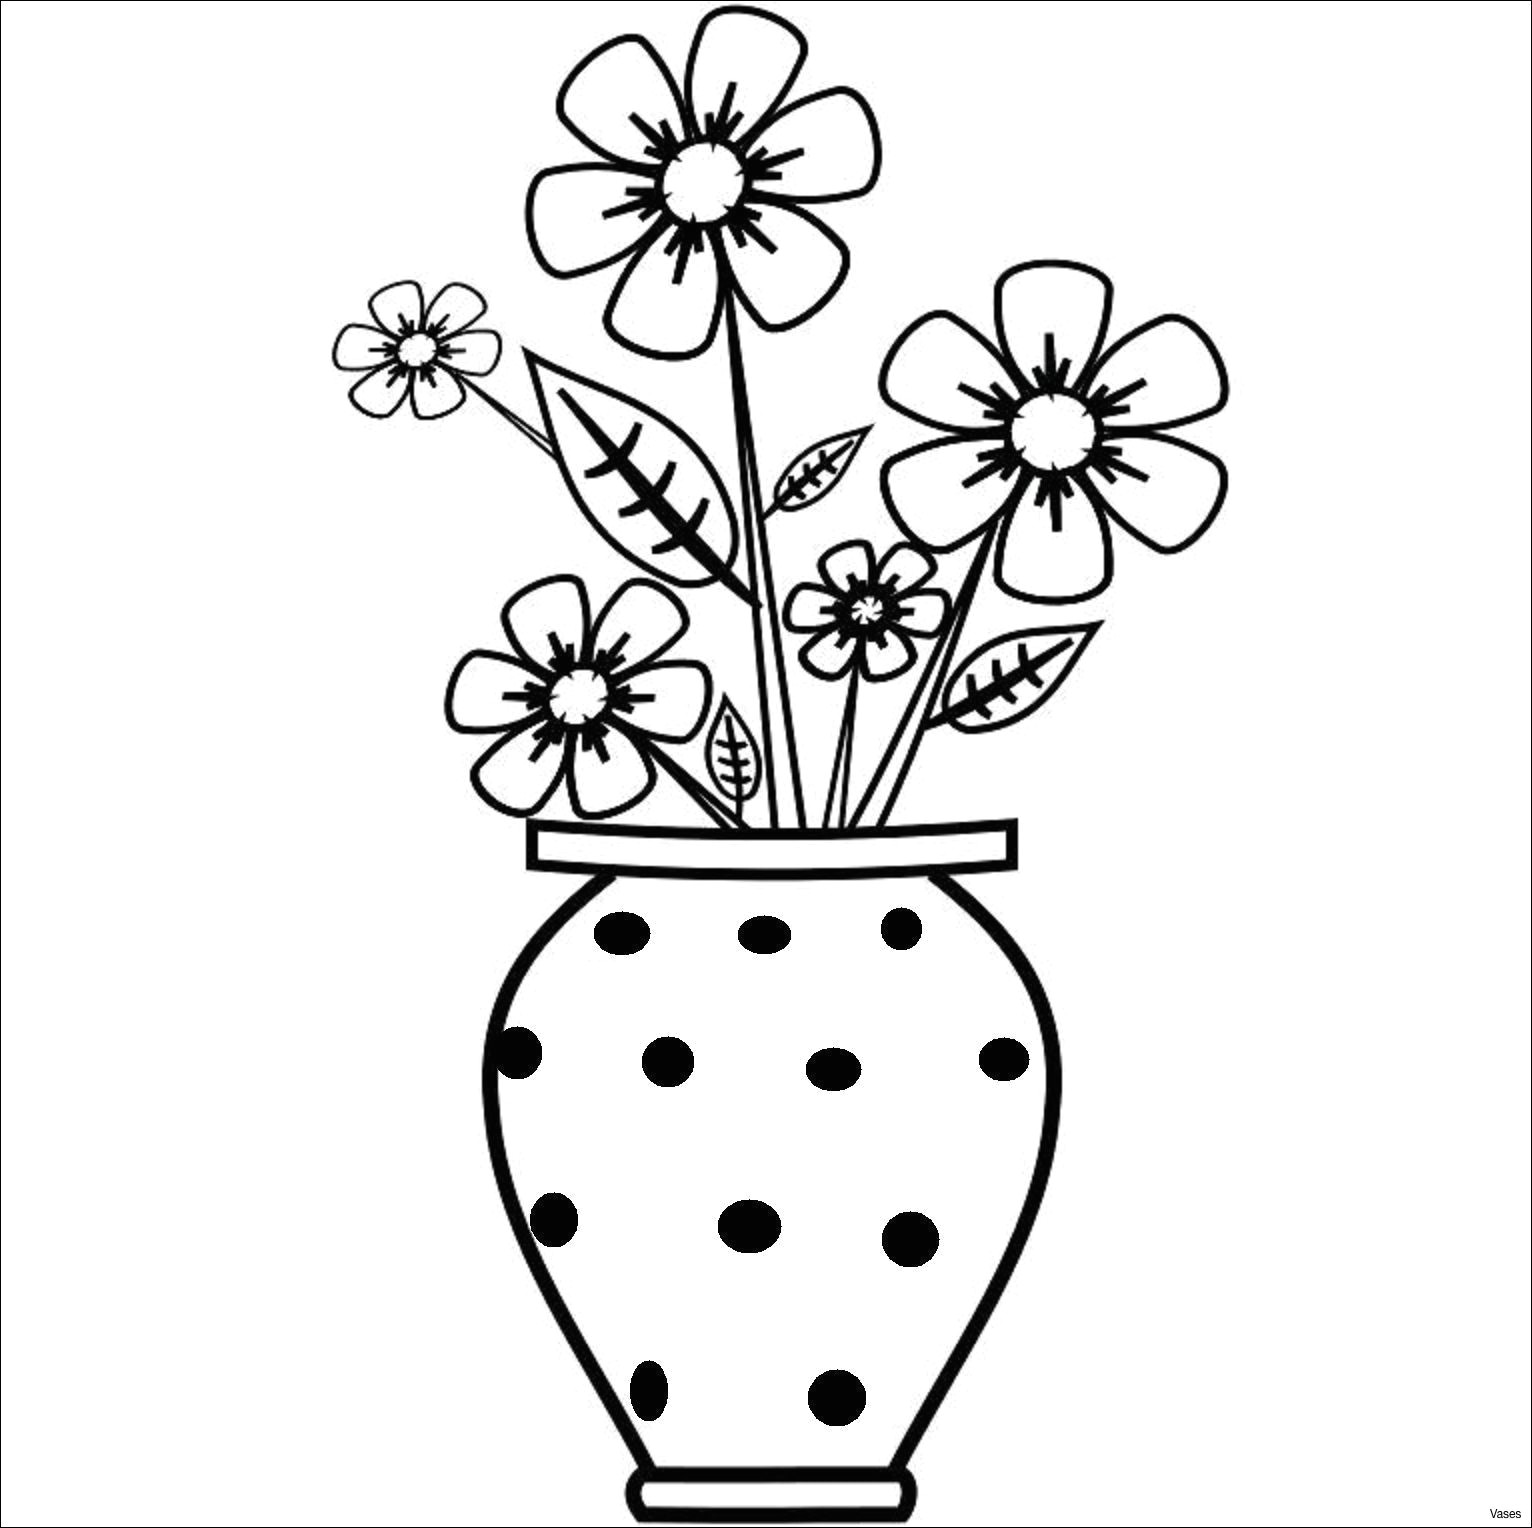 Easy Drawings with Steps Images Of Easy Drawings Vase Art Drawings How to Draw A Vase Step 2h